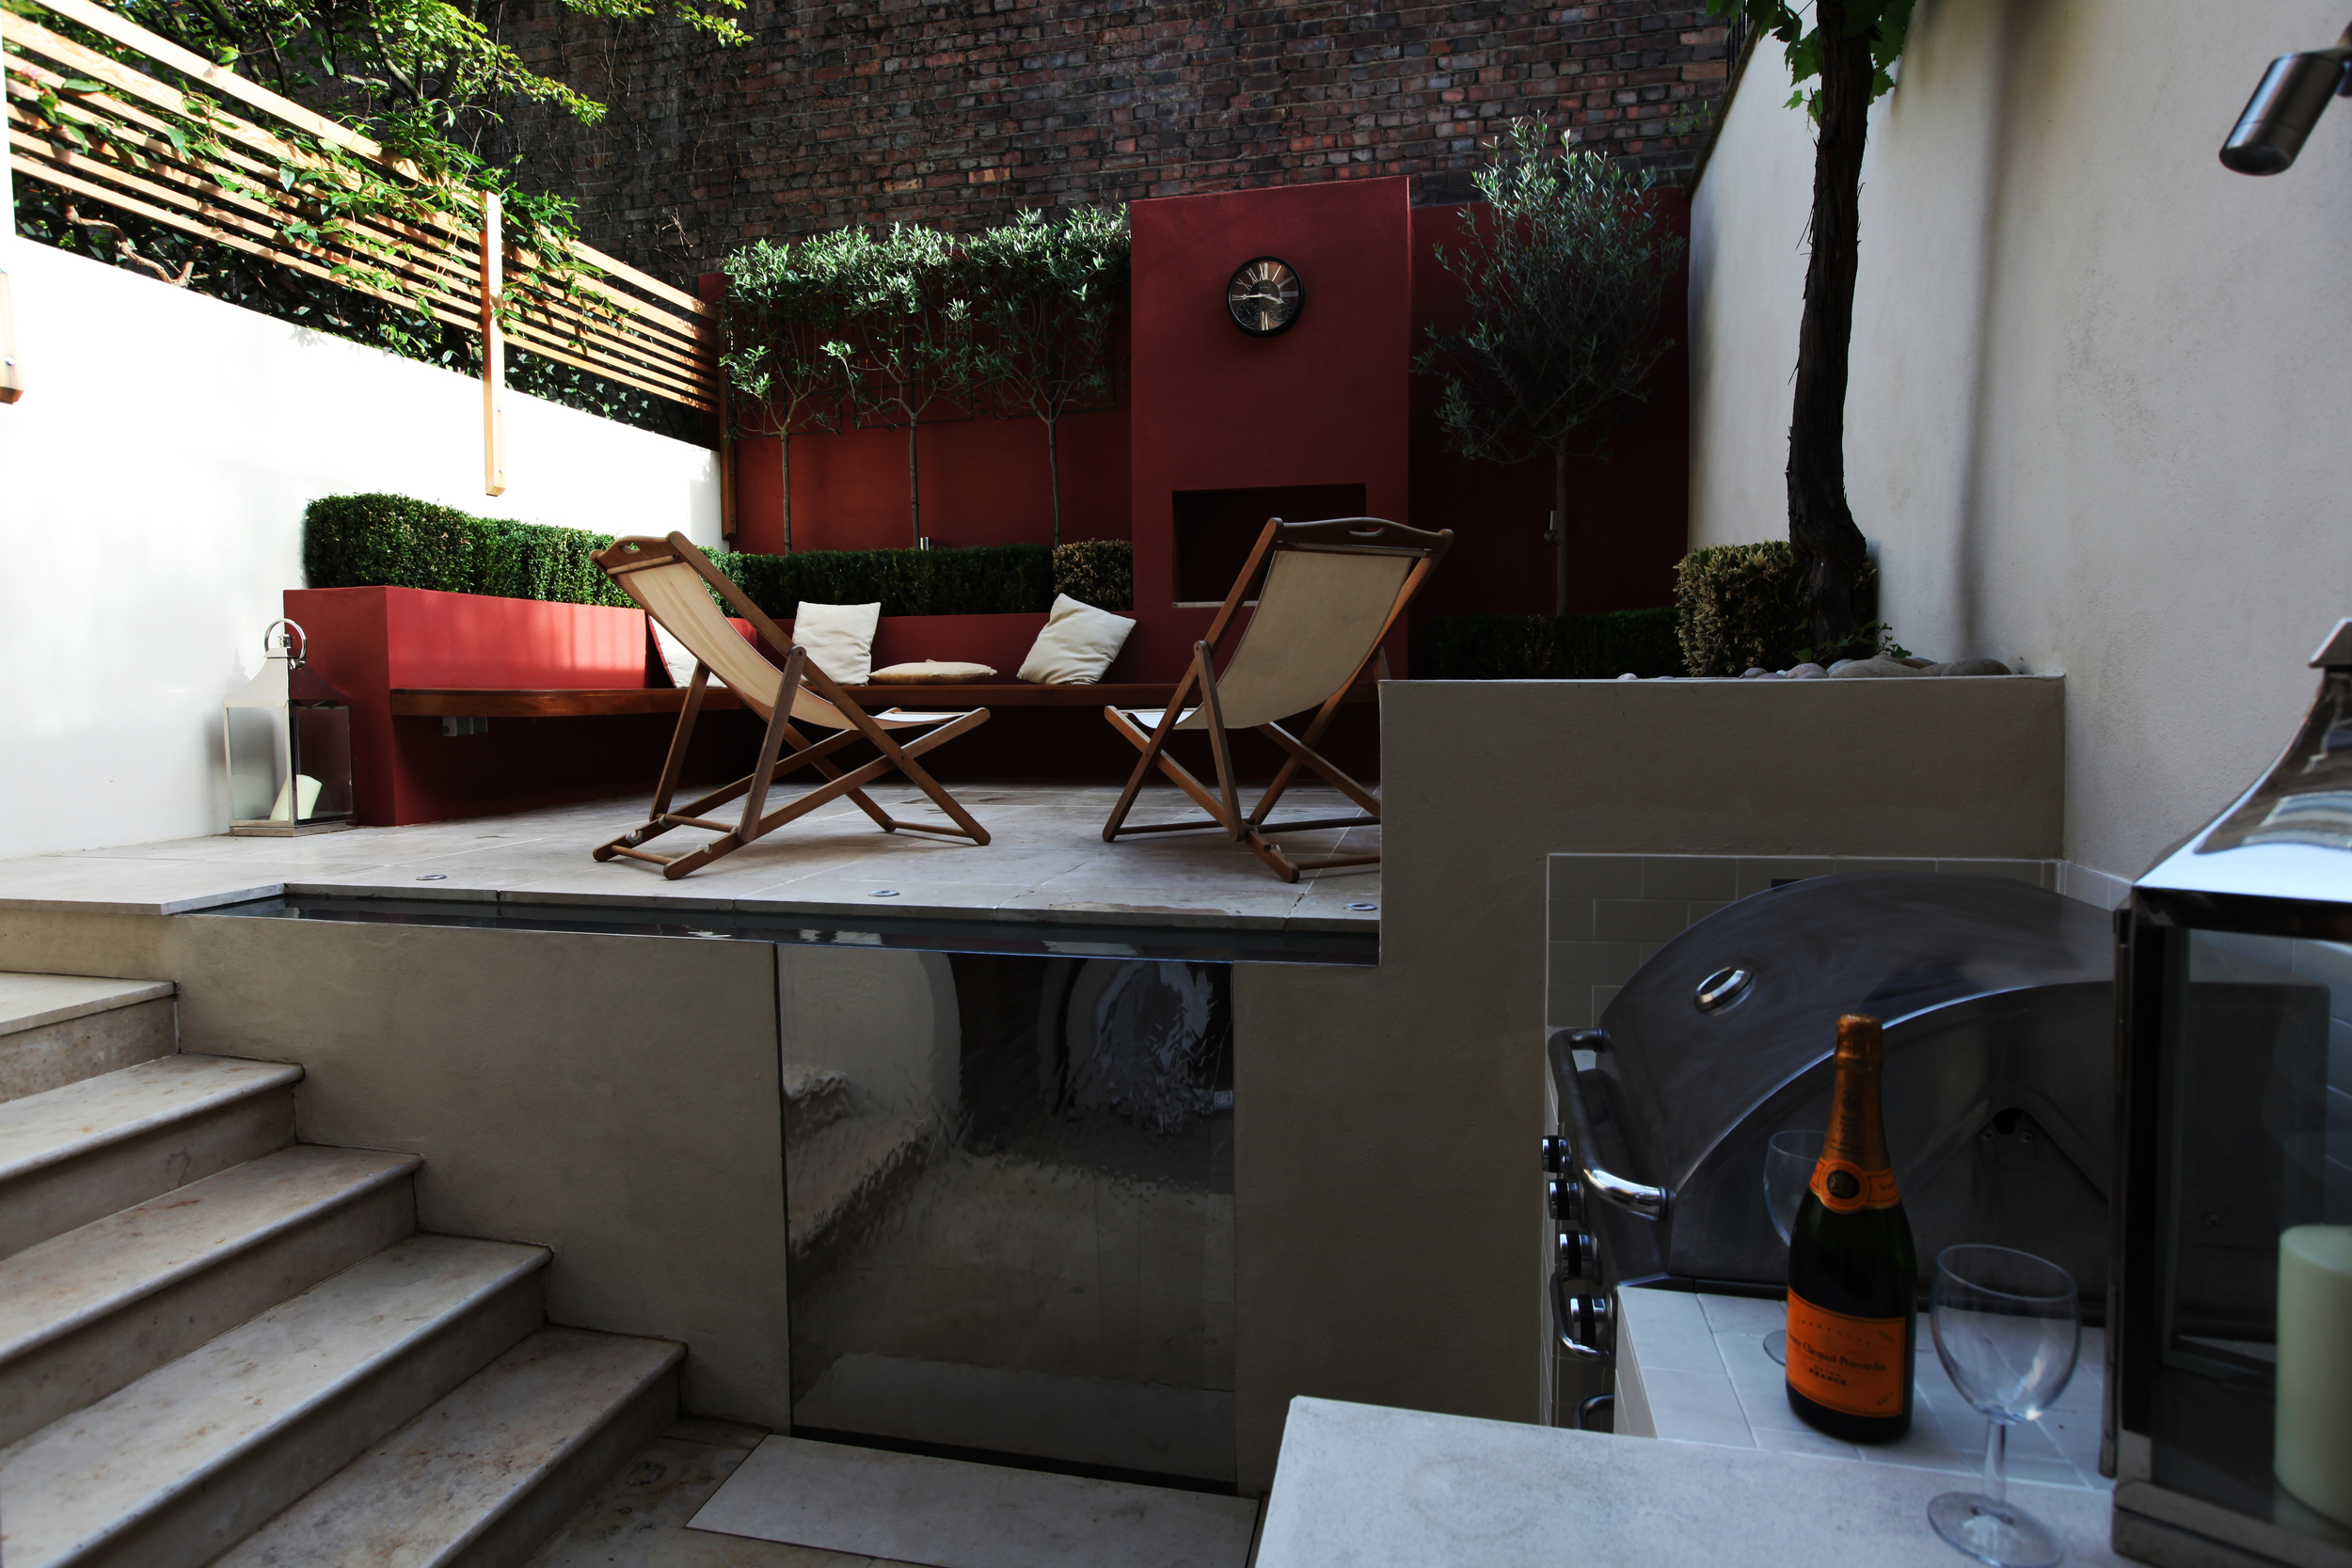 Islington courtyard garden redesign with outdoor kitchen and seating